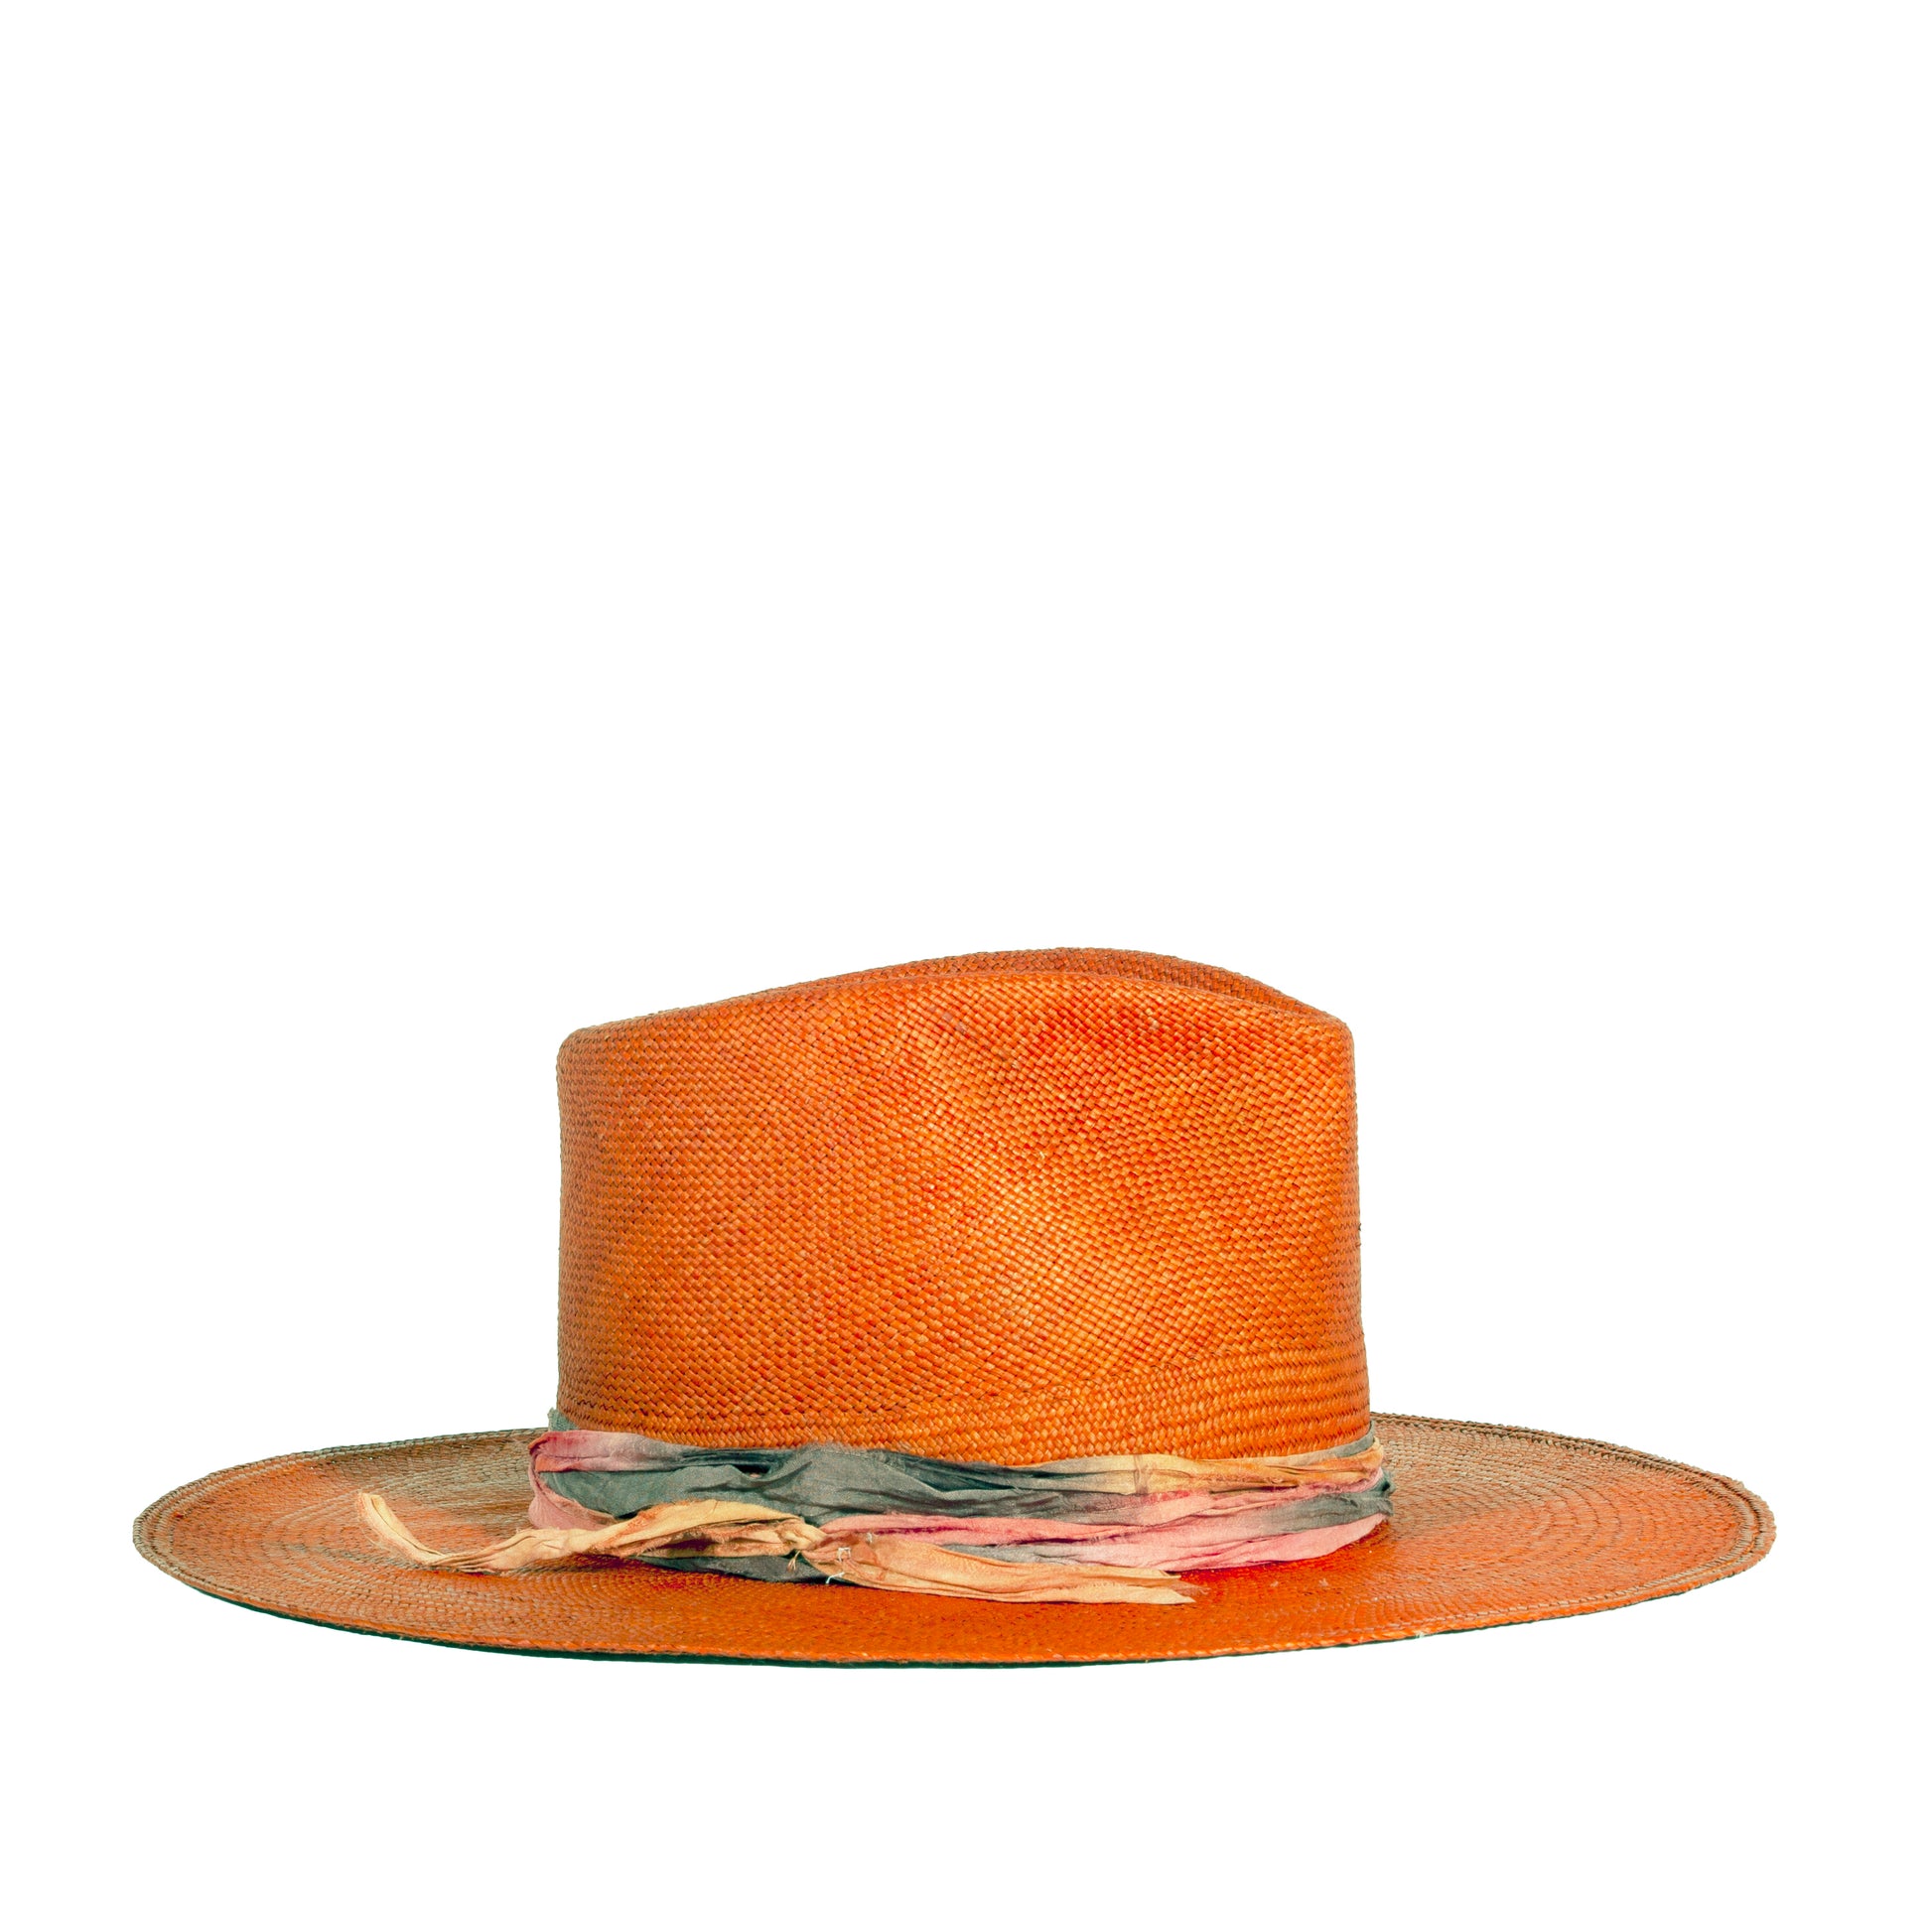 Distressed custom 100% straw hat frayed brim. Made in USA.  Every Hat Is Made To Order: No Mass Production, Less Waste, More Love. Discover Your Hat Size, Select Colors, The Design And Finishings. Ready To Ship Designs. Handmade. One-of-a-kind. Ethically Sourced. Types: Fur Felt, Handwoven Straw, Custom, Made-to-order. Inspirations: Fedora, Western, Cowboy, Bucket, Mad Hatter, Top Hat, Derby, Bowler and contemporary psychedelic.